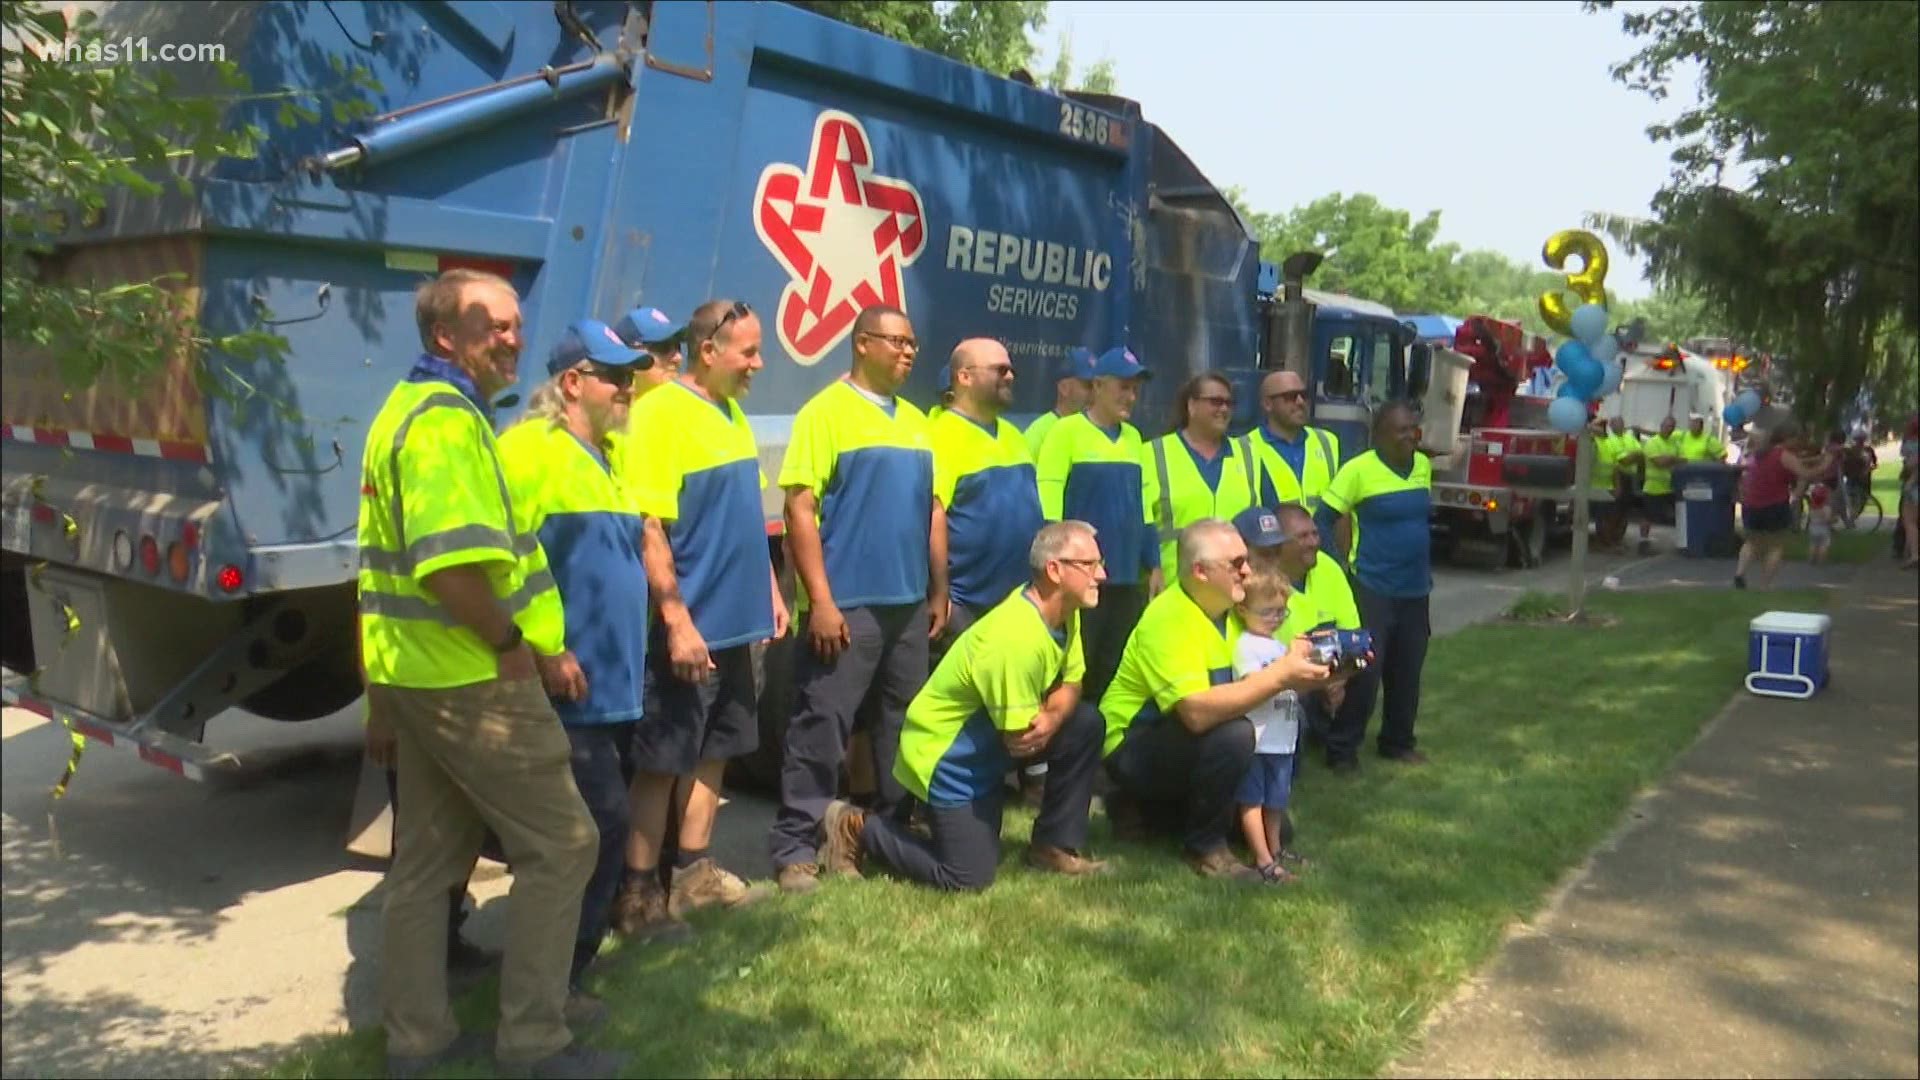 Daniel Shaffer's birthday wish was granted, thanks in part to the drivers of a dozen Republic Services trucks.